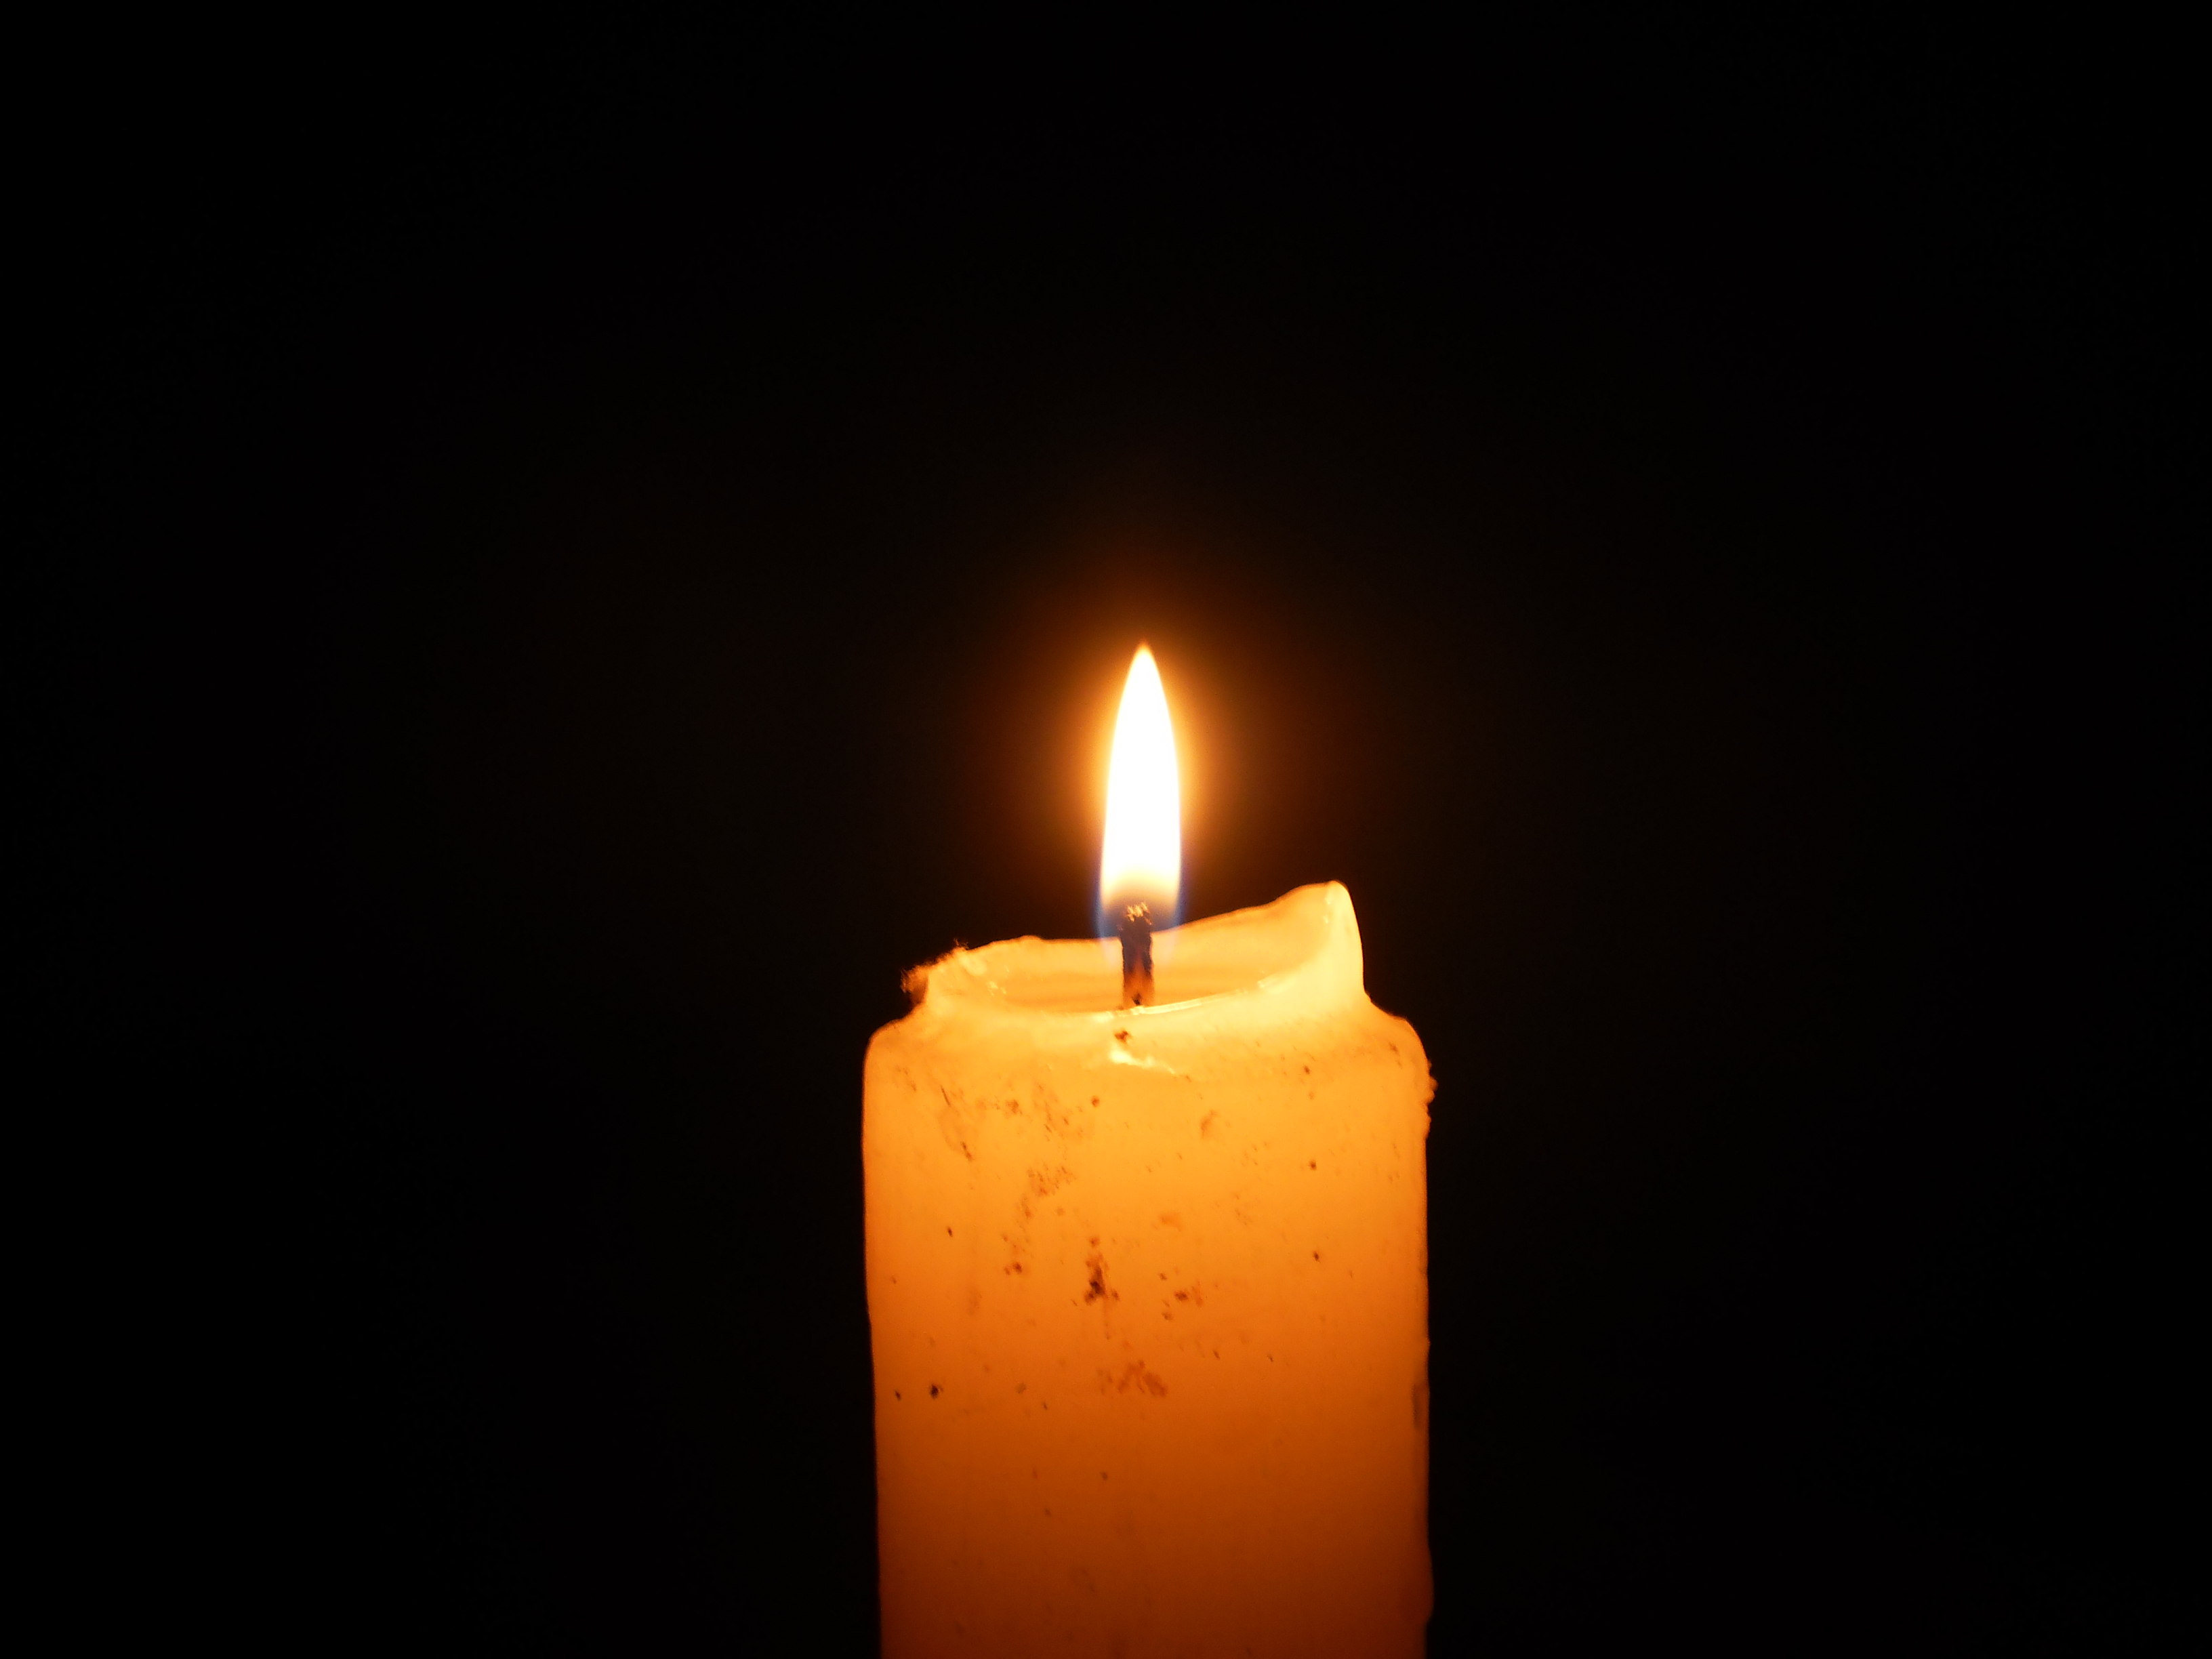 FileLighted candle at night5.JPG Wikimedia Commons